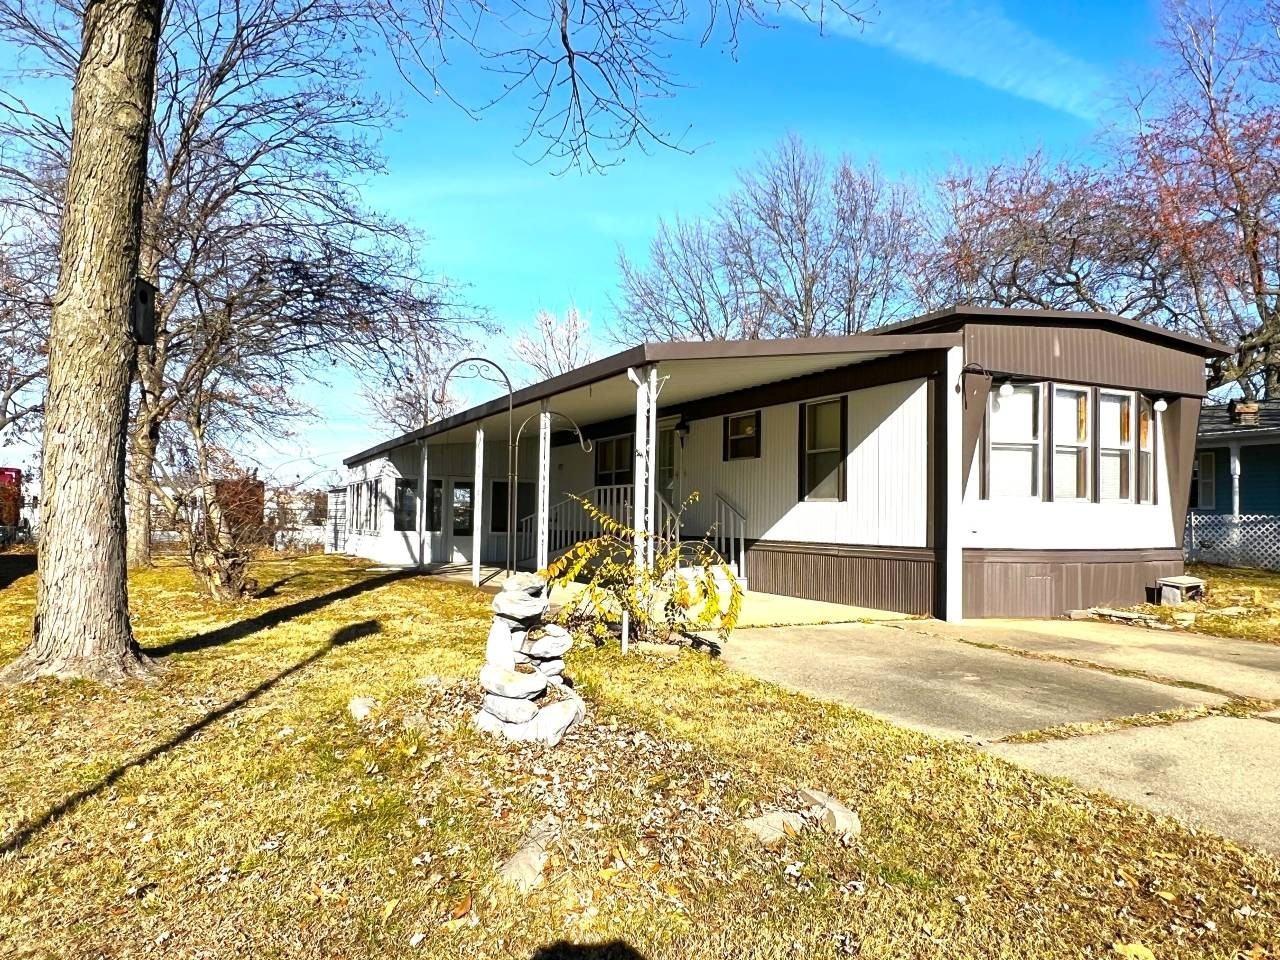 1. 202 W. Glenwood St. Leased Land Mobile Home Only Being Sold.